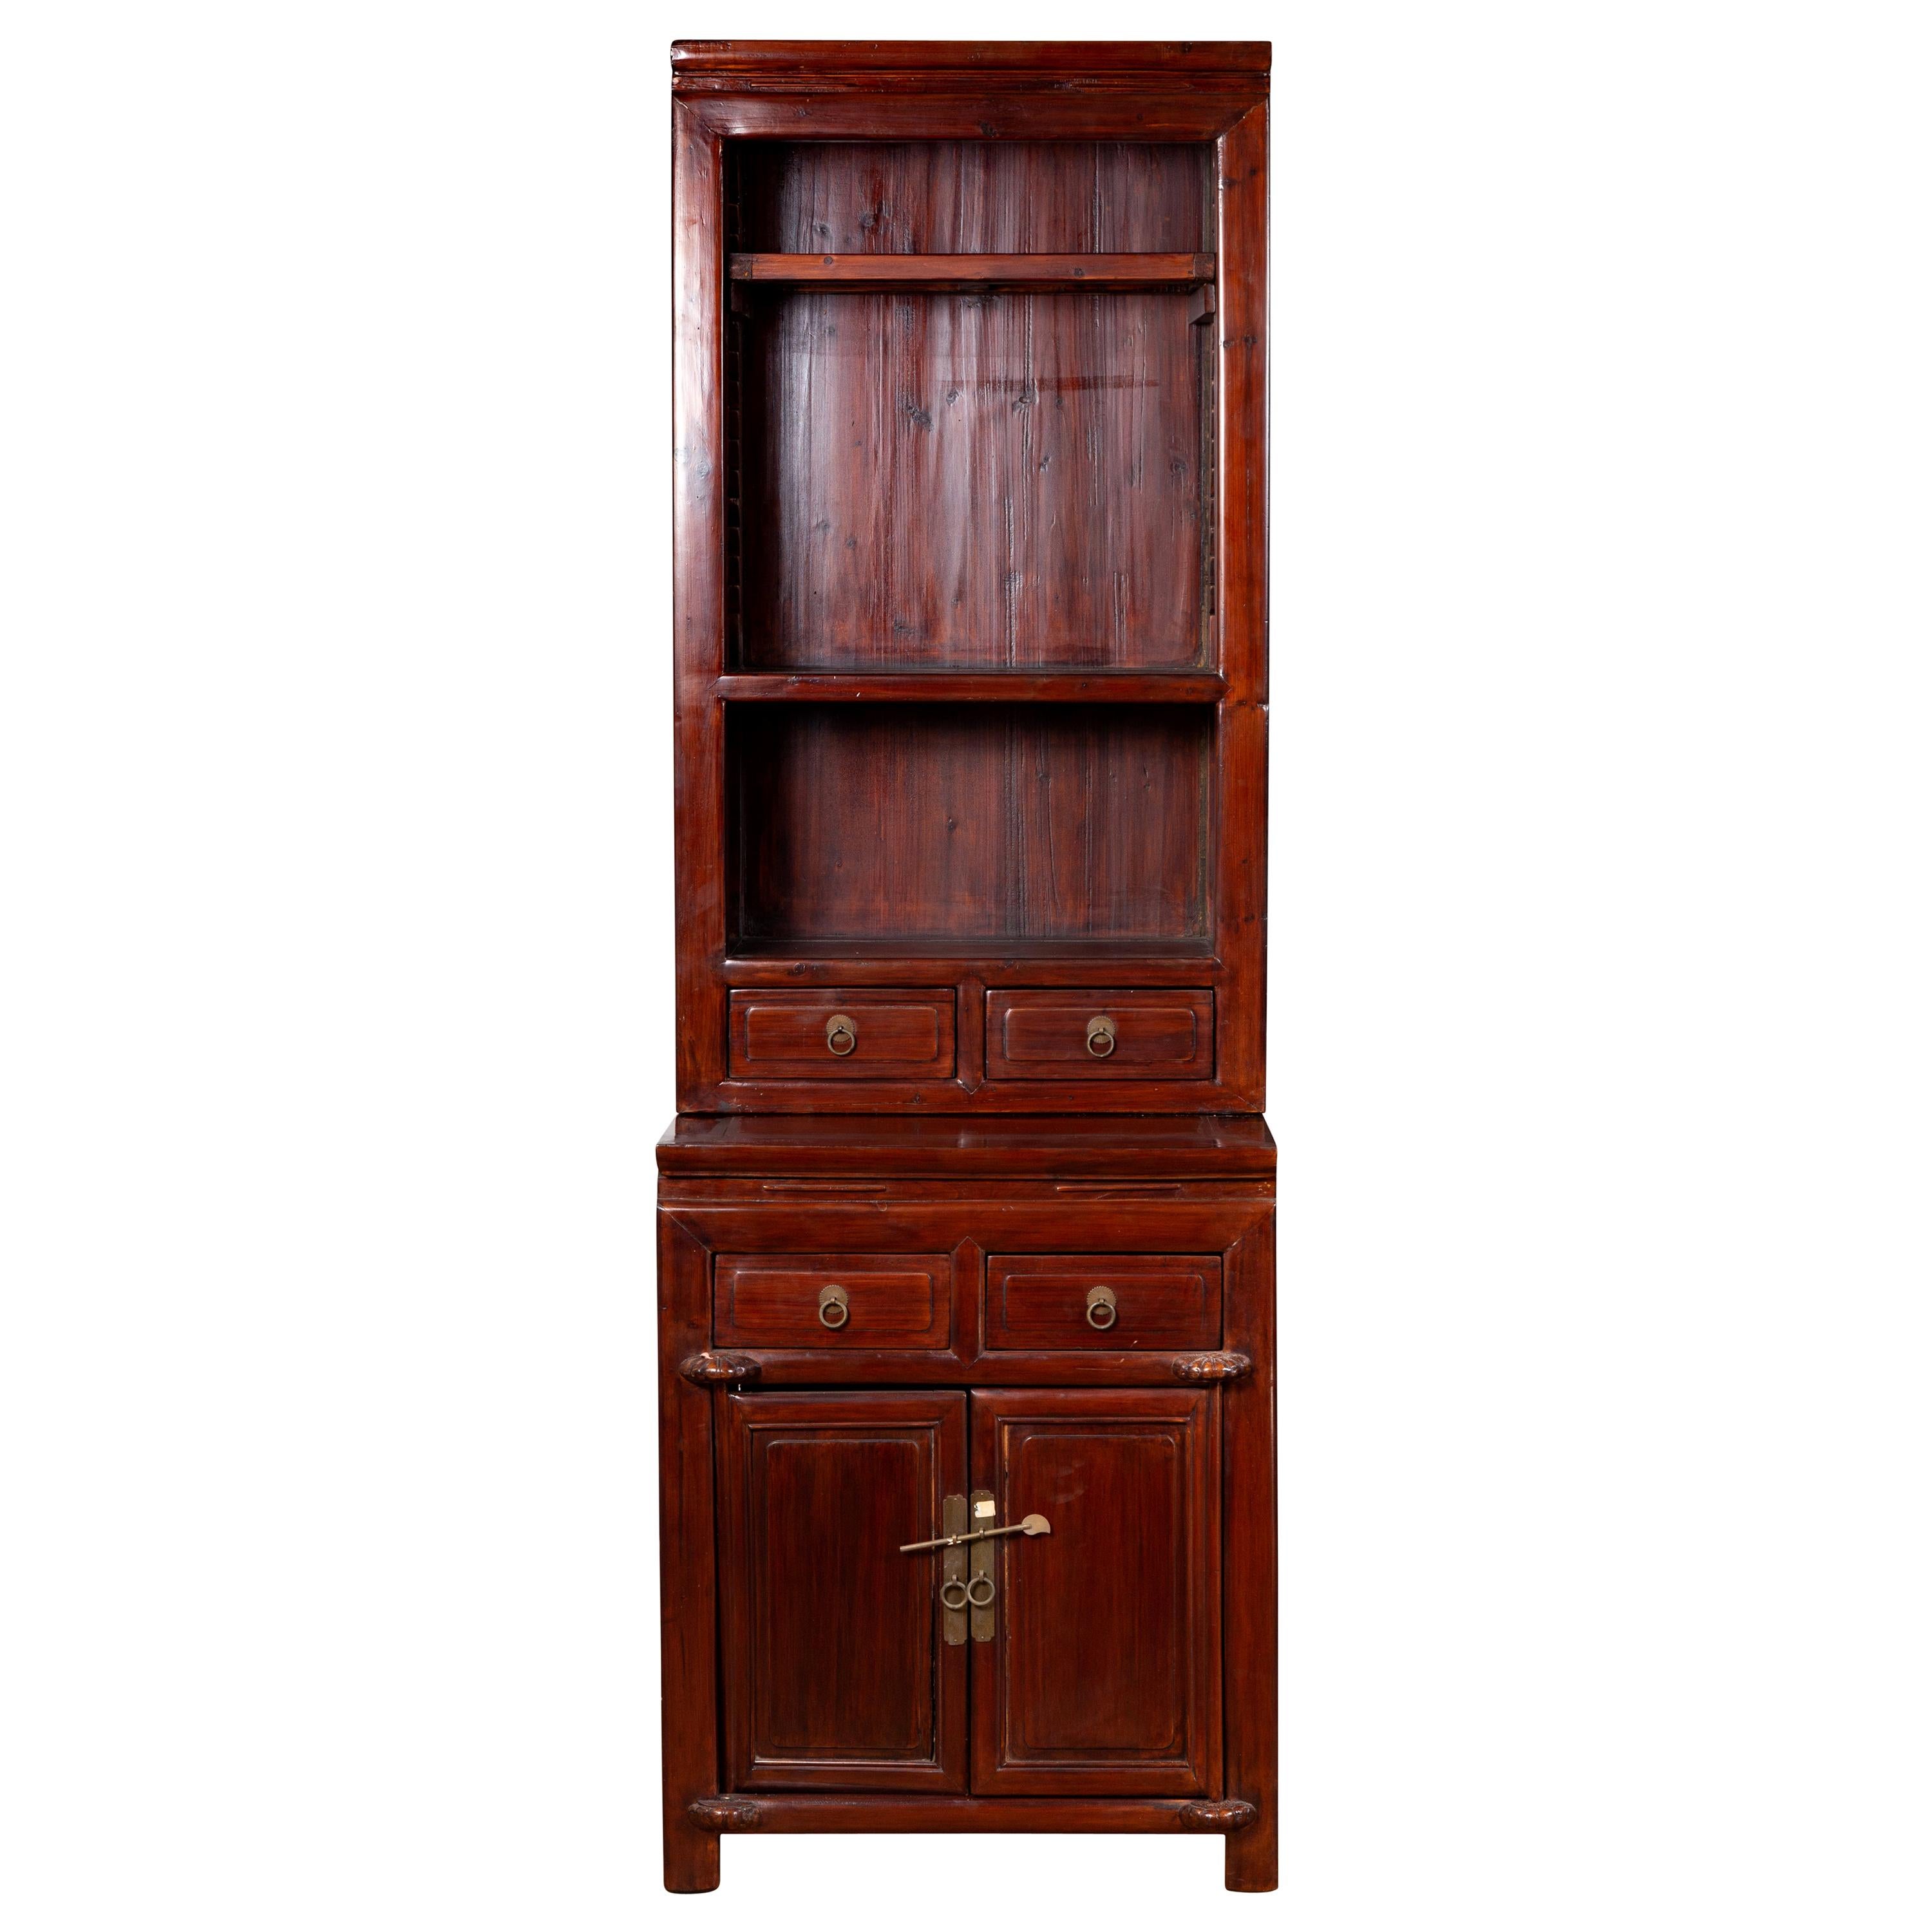 Tall Chinese Antique Two-Part Lacquered Cupboard with Shelves, Doors and Drawers